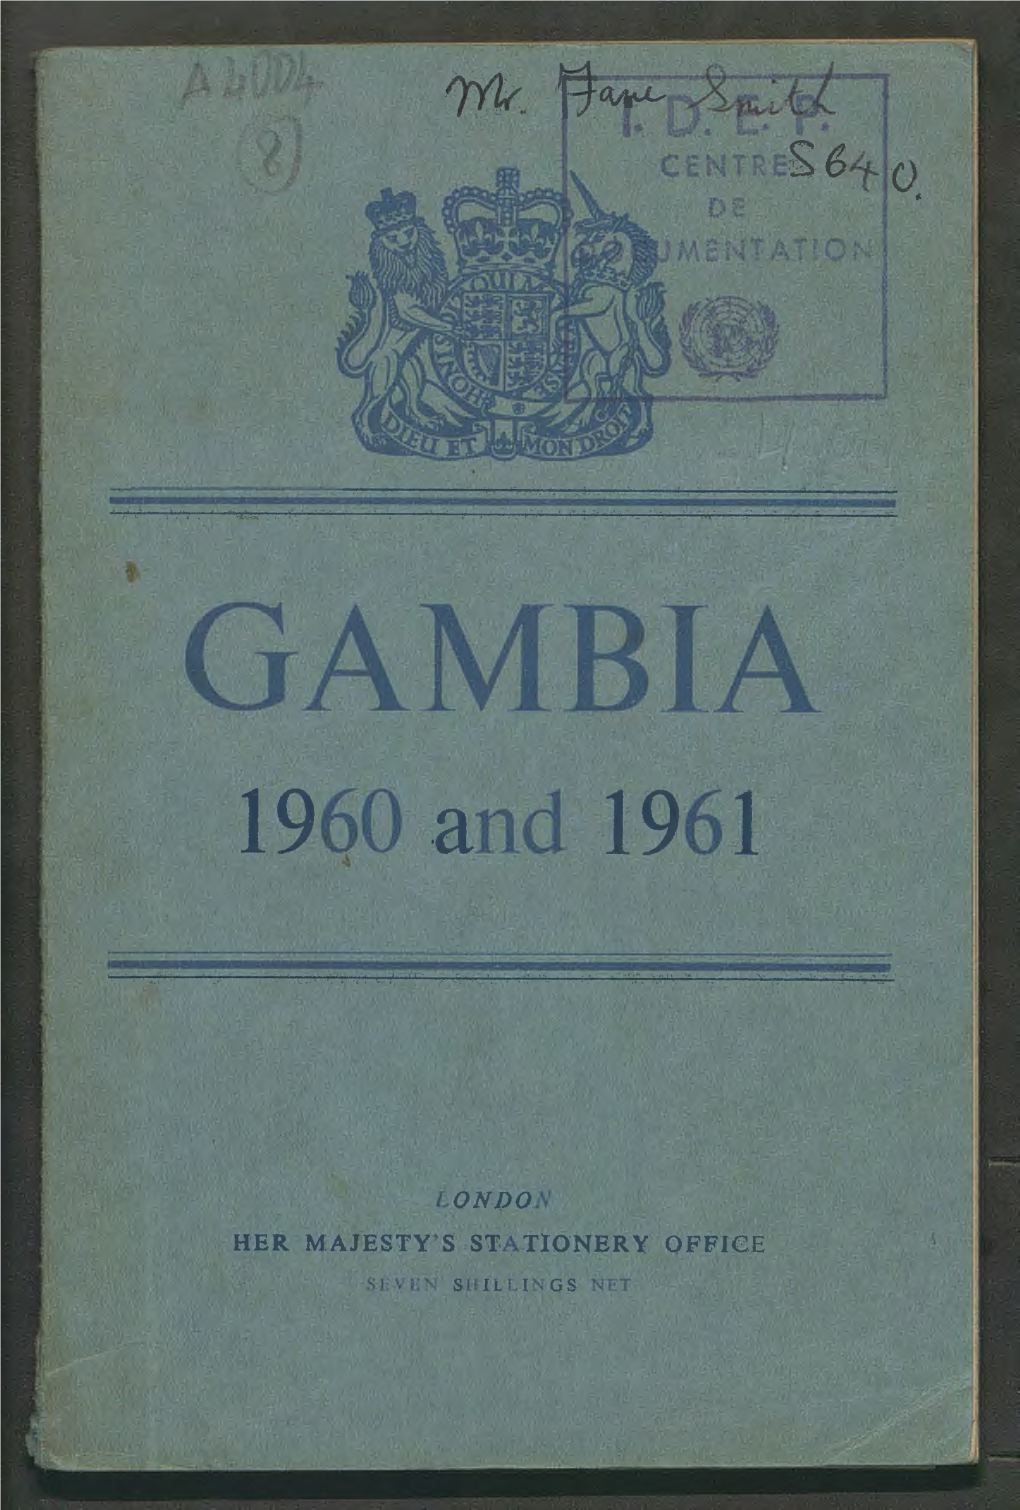 GAMBIA I960 and 1961